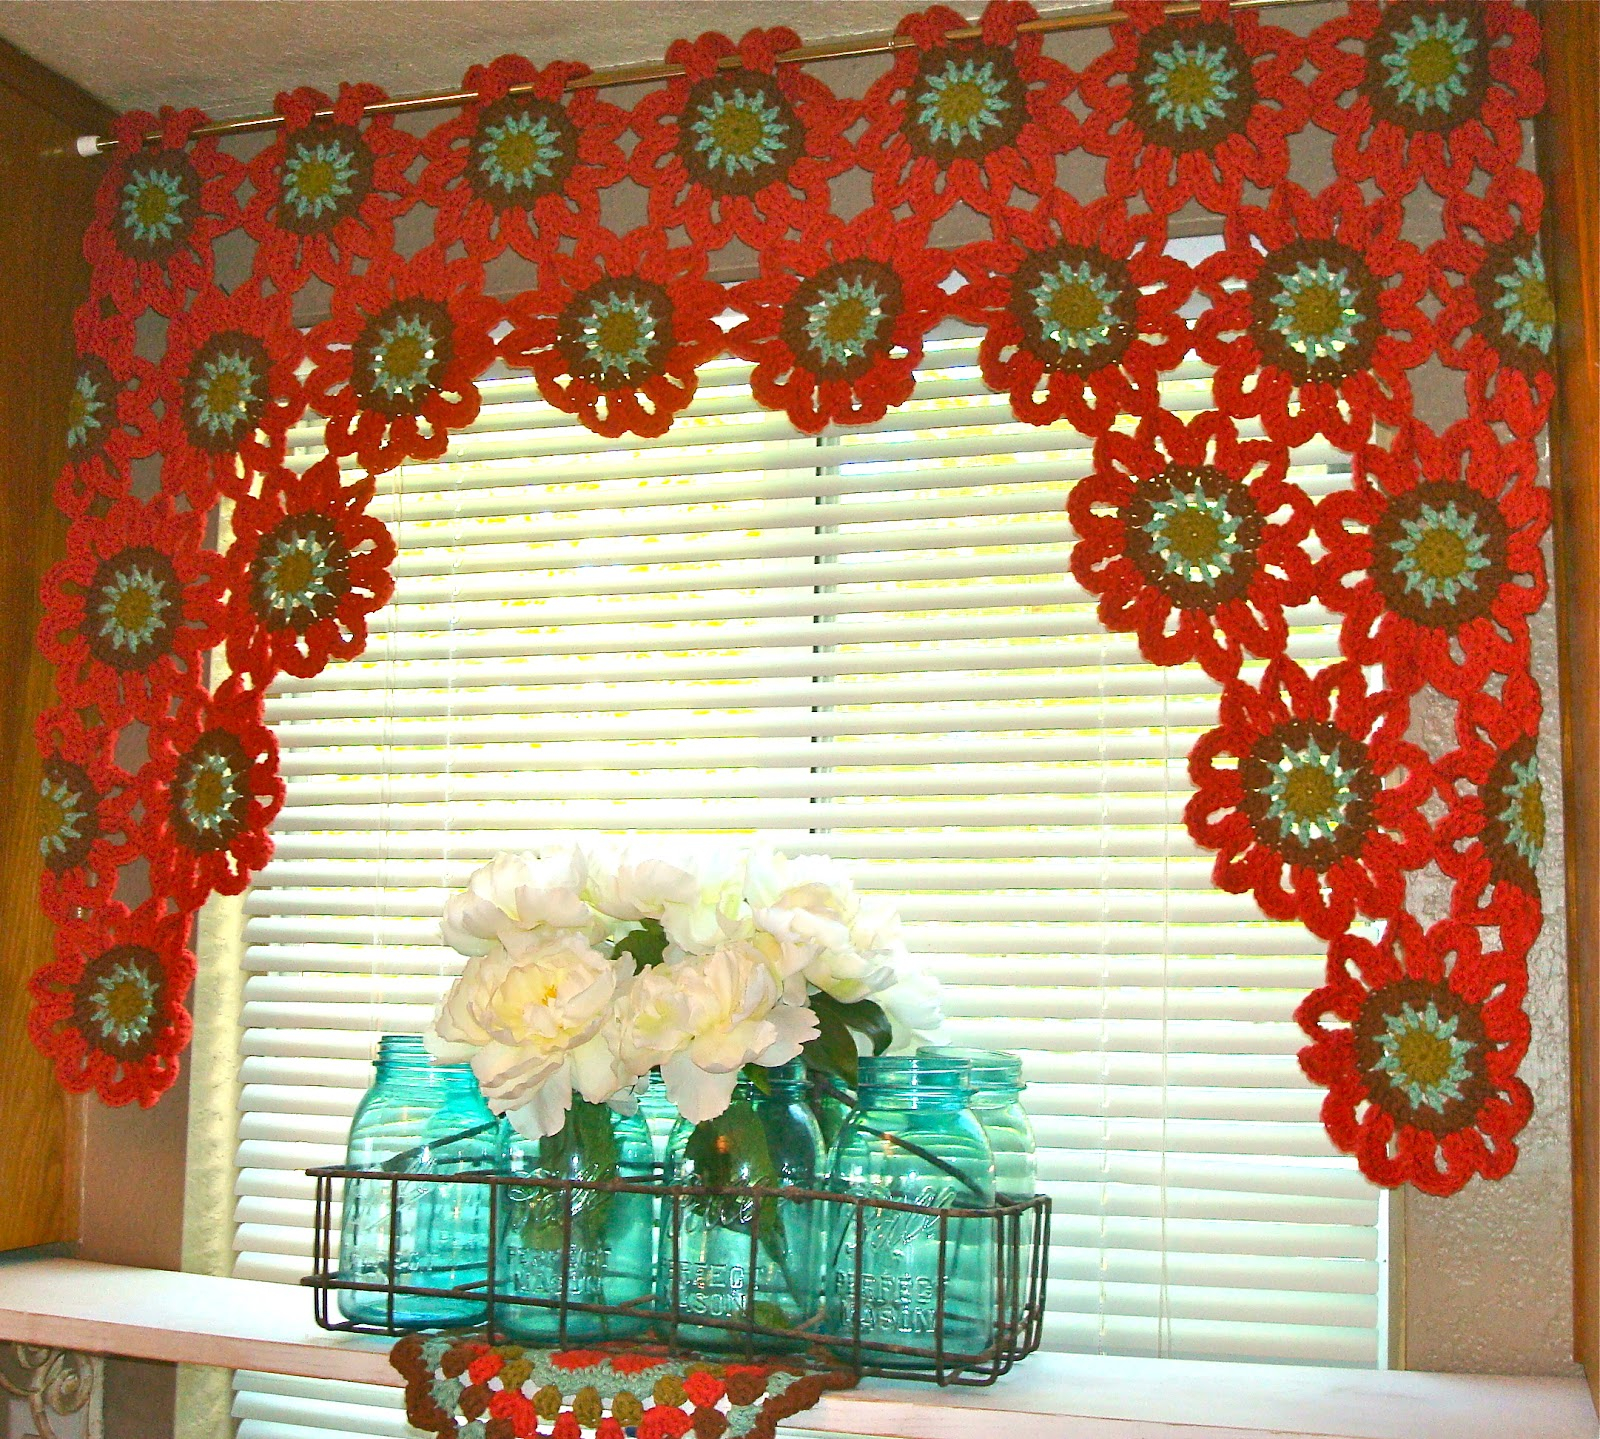 Crochet Curtain Patterns 19 Cool Patterns For Crochet Curtains Guide Patterns